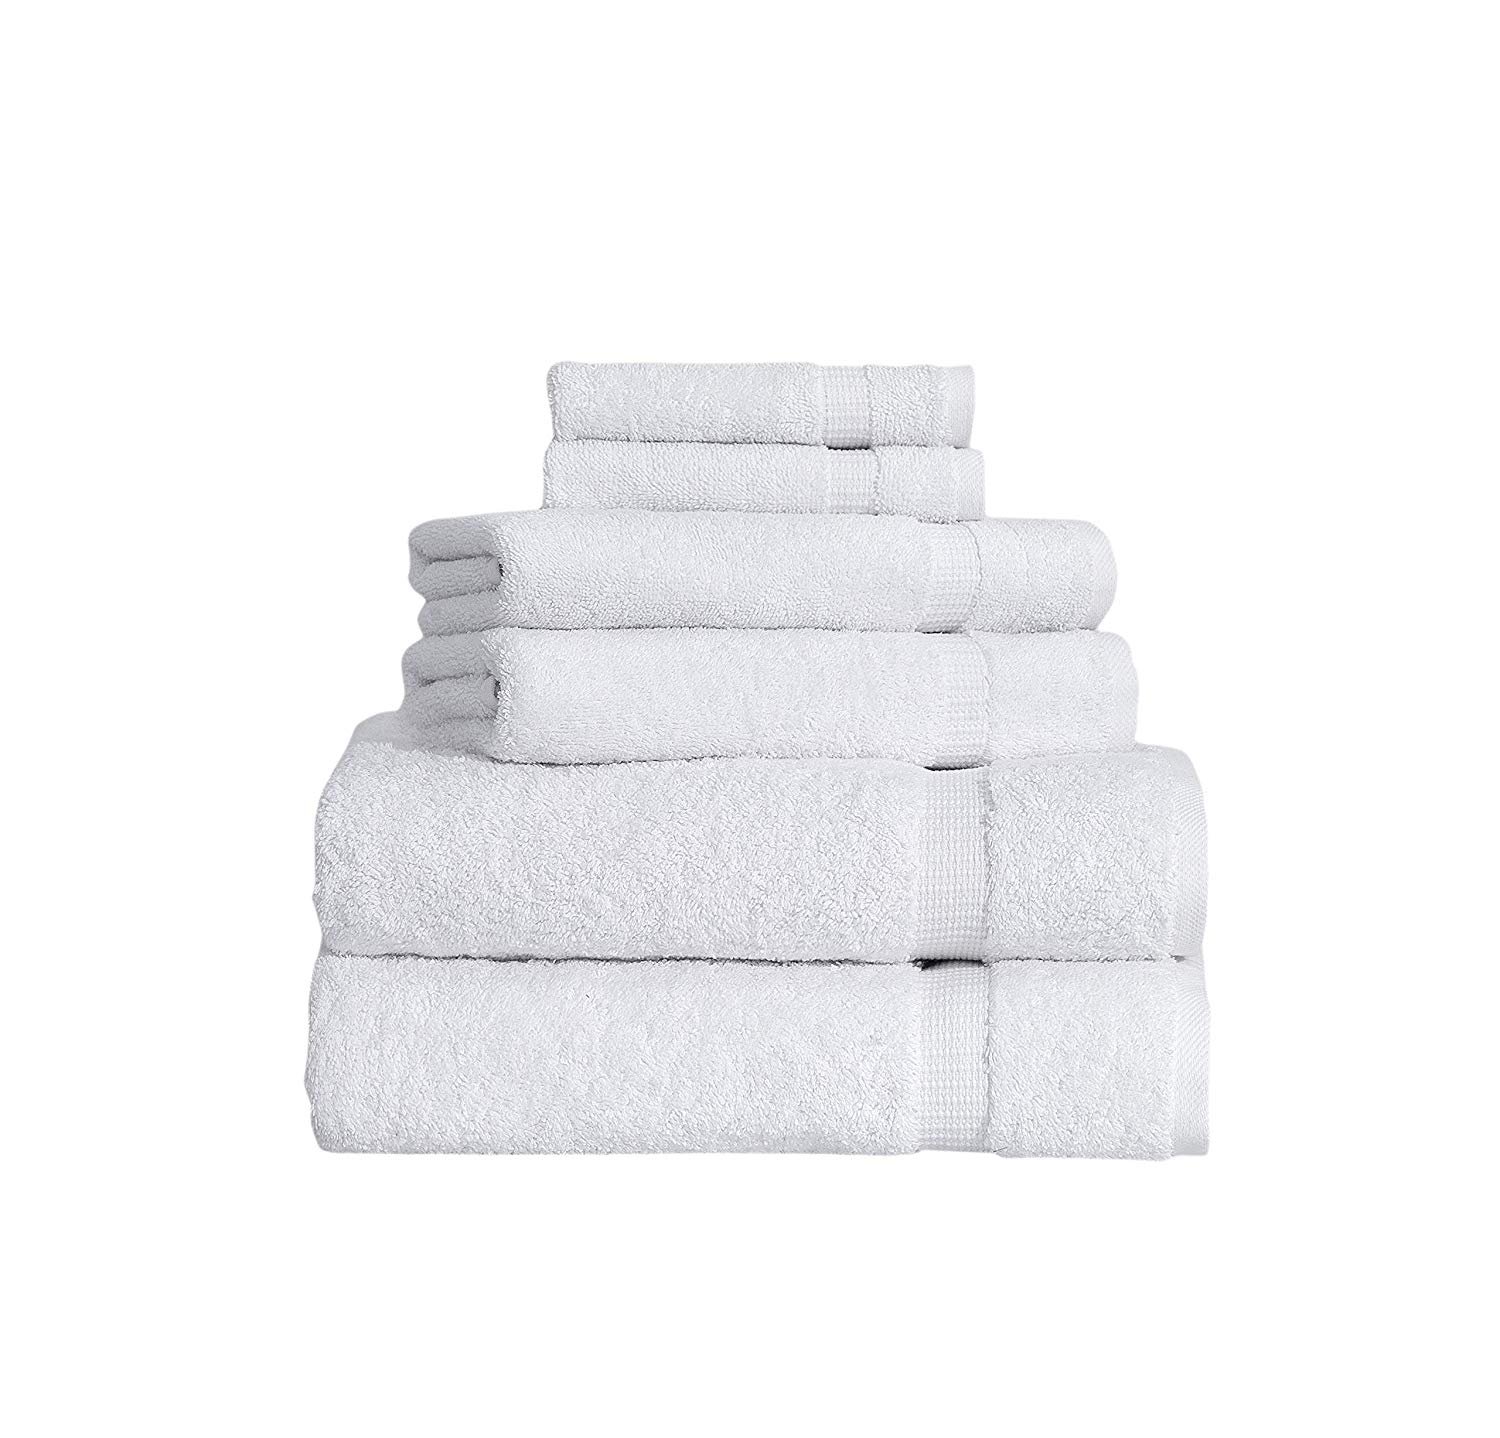 SALBAKOS Luxury Hotel Turkish Cotton Eco-Friendly Towels Pick Color/Size/Qty 